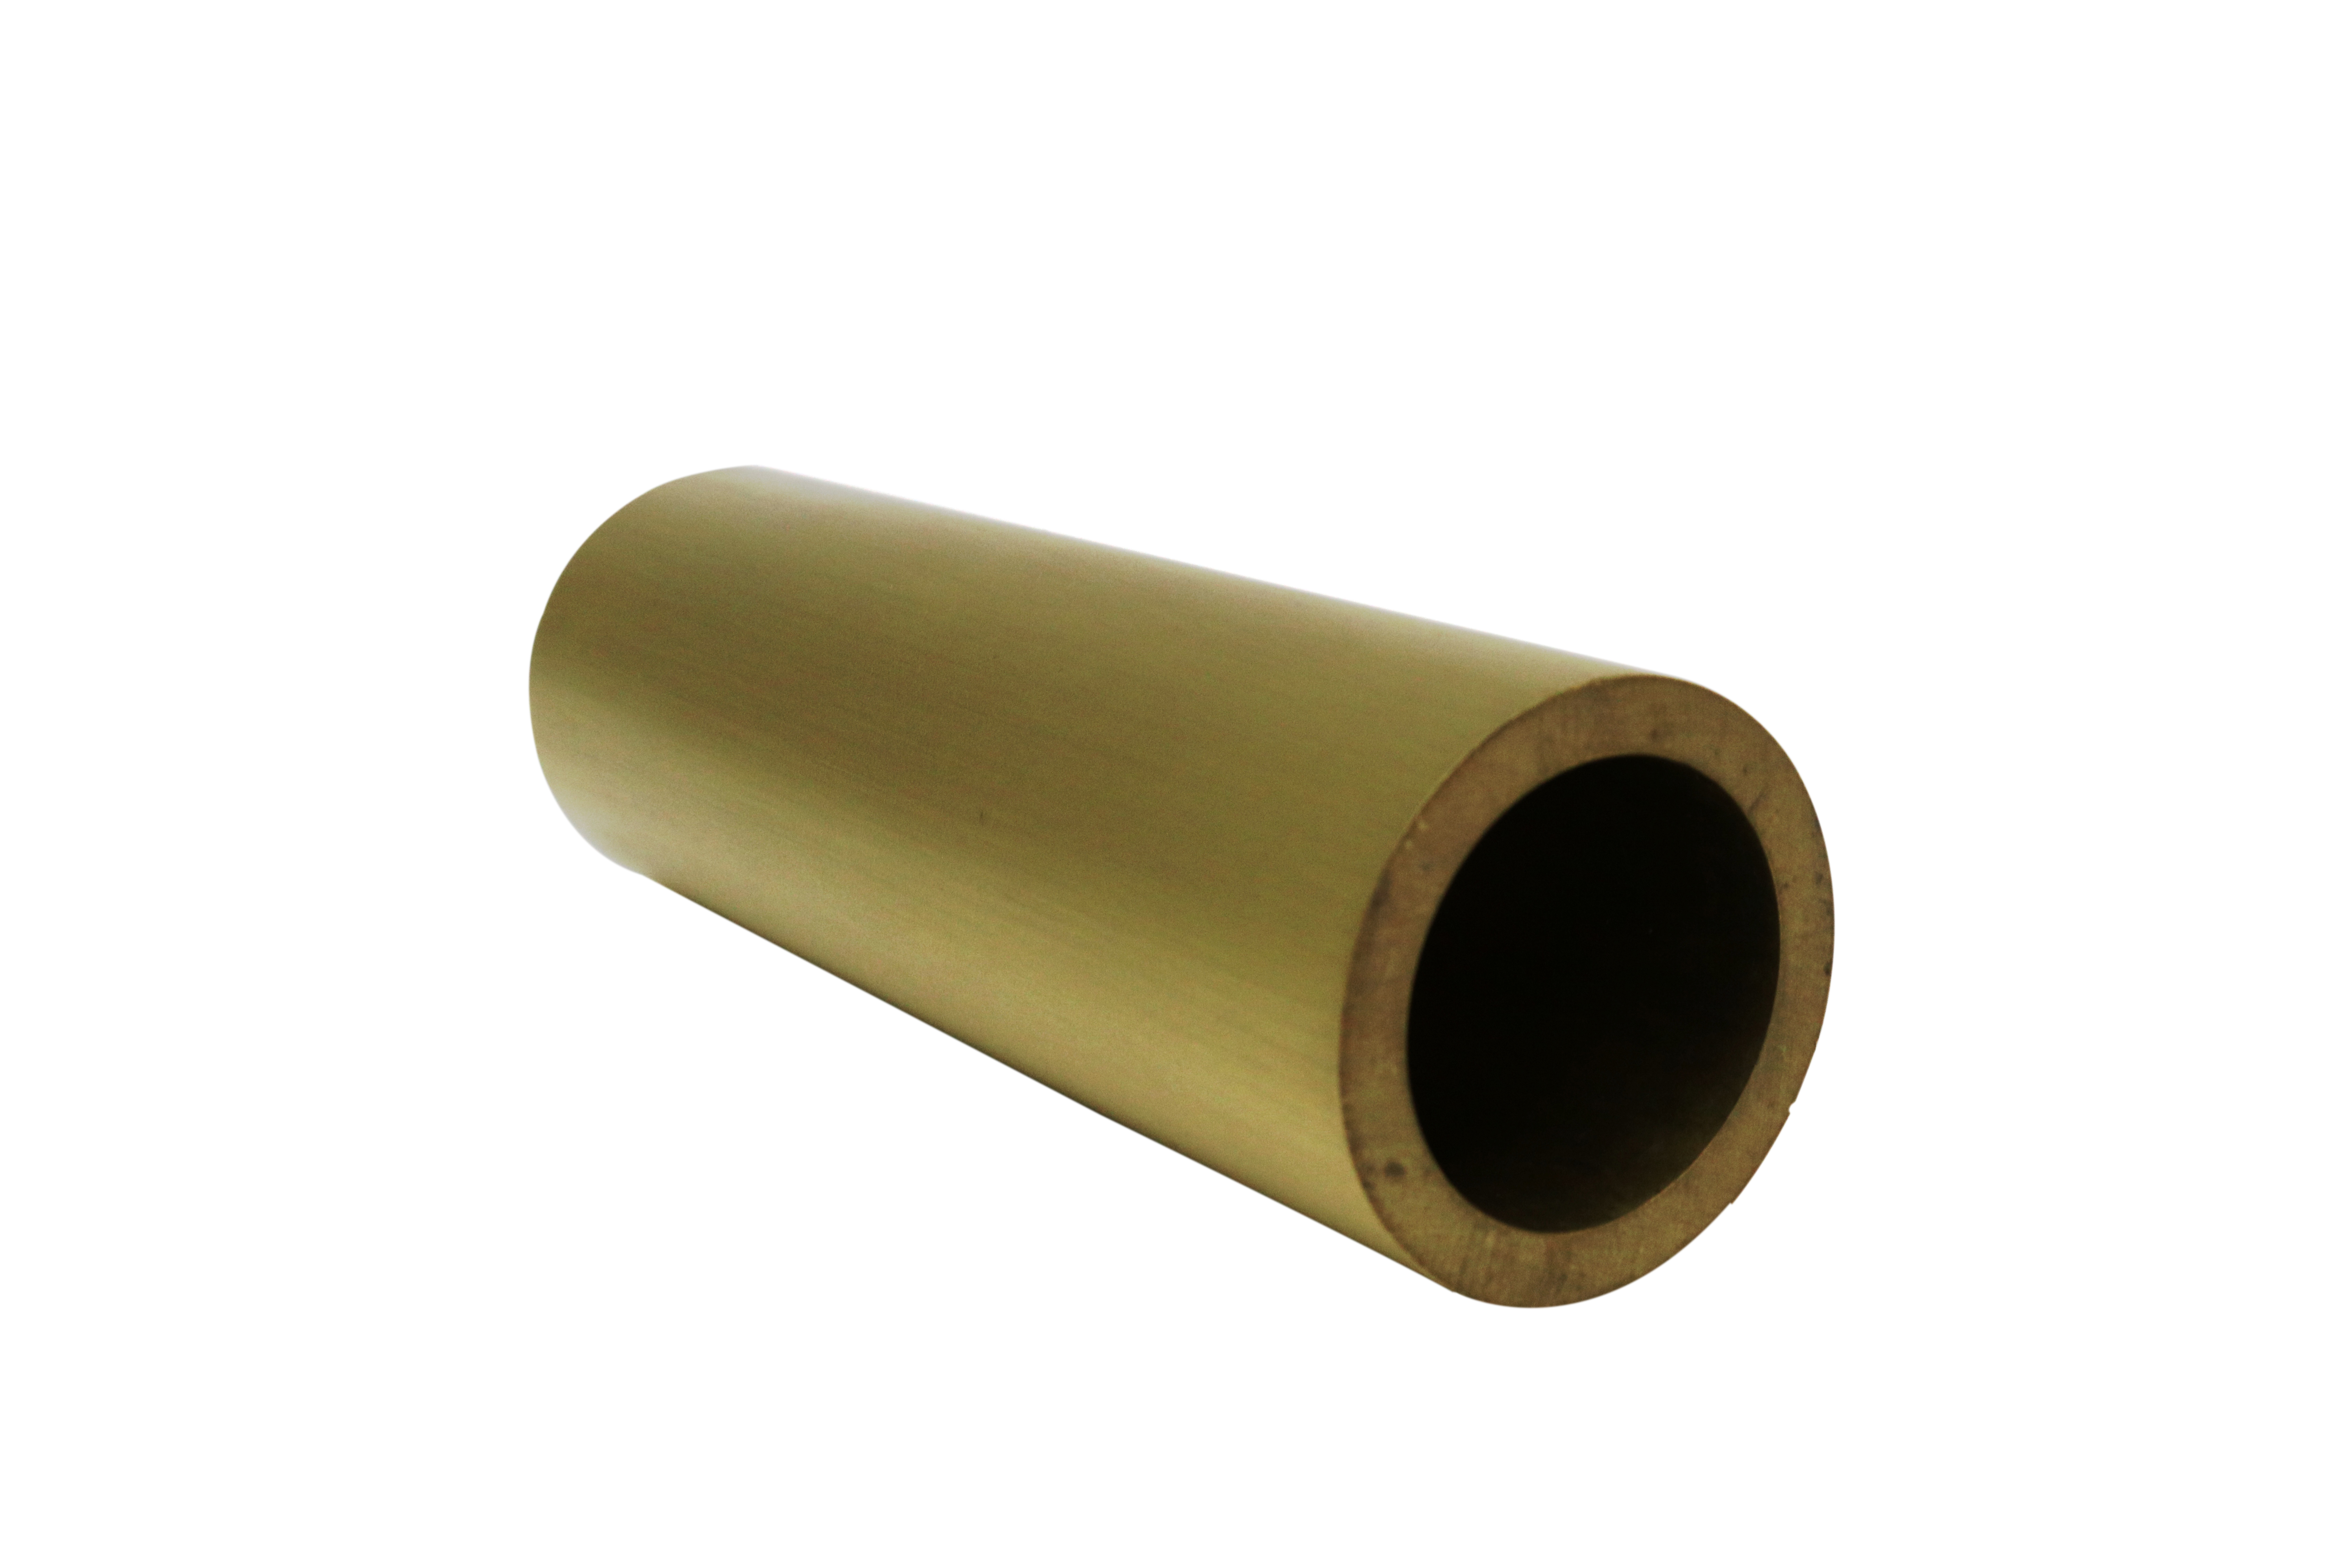 5pcs/ Lot 10cm Brass Tube Pipe, for Model Making Architectural